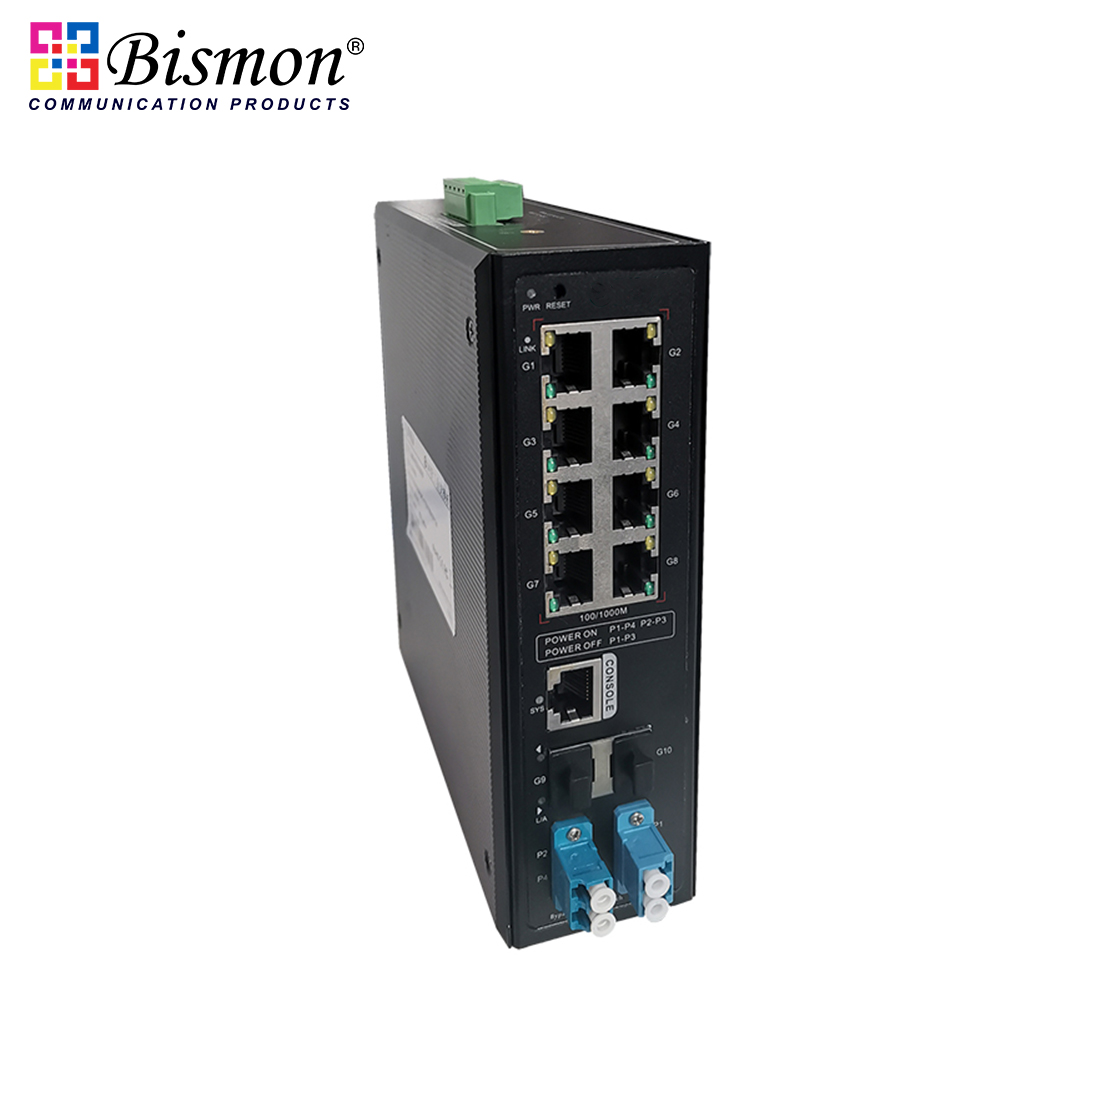 Full-gigabit-10-port-managed-bypass-industrial-Ethernet-switch